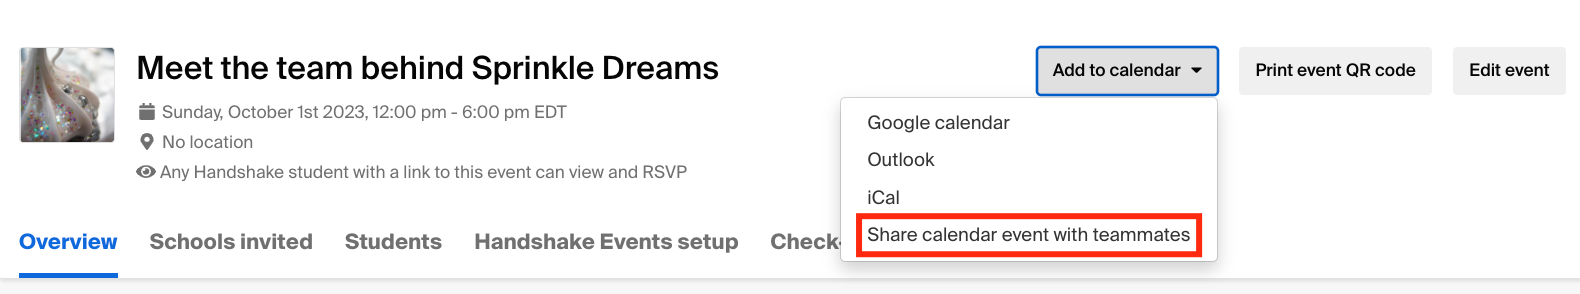 Select share calendar event with teammates from the dropdown on the event page.png